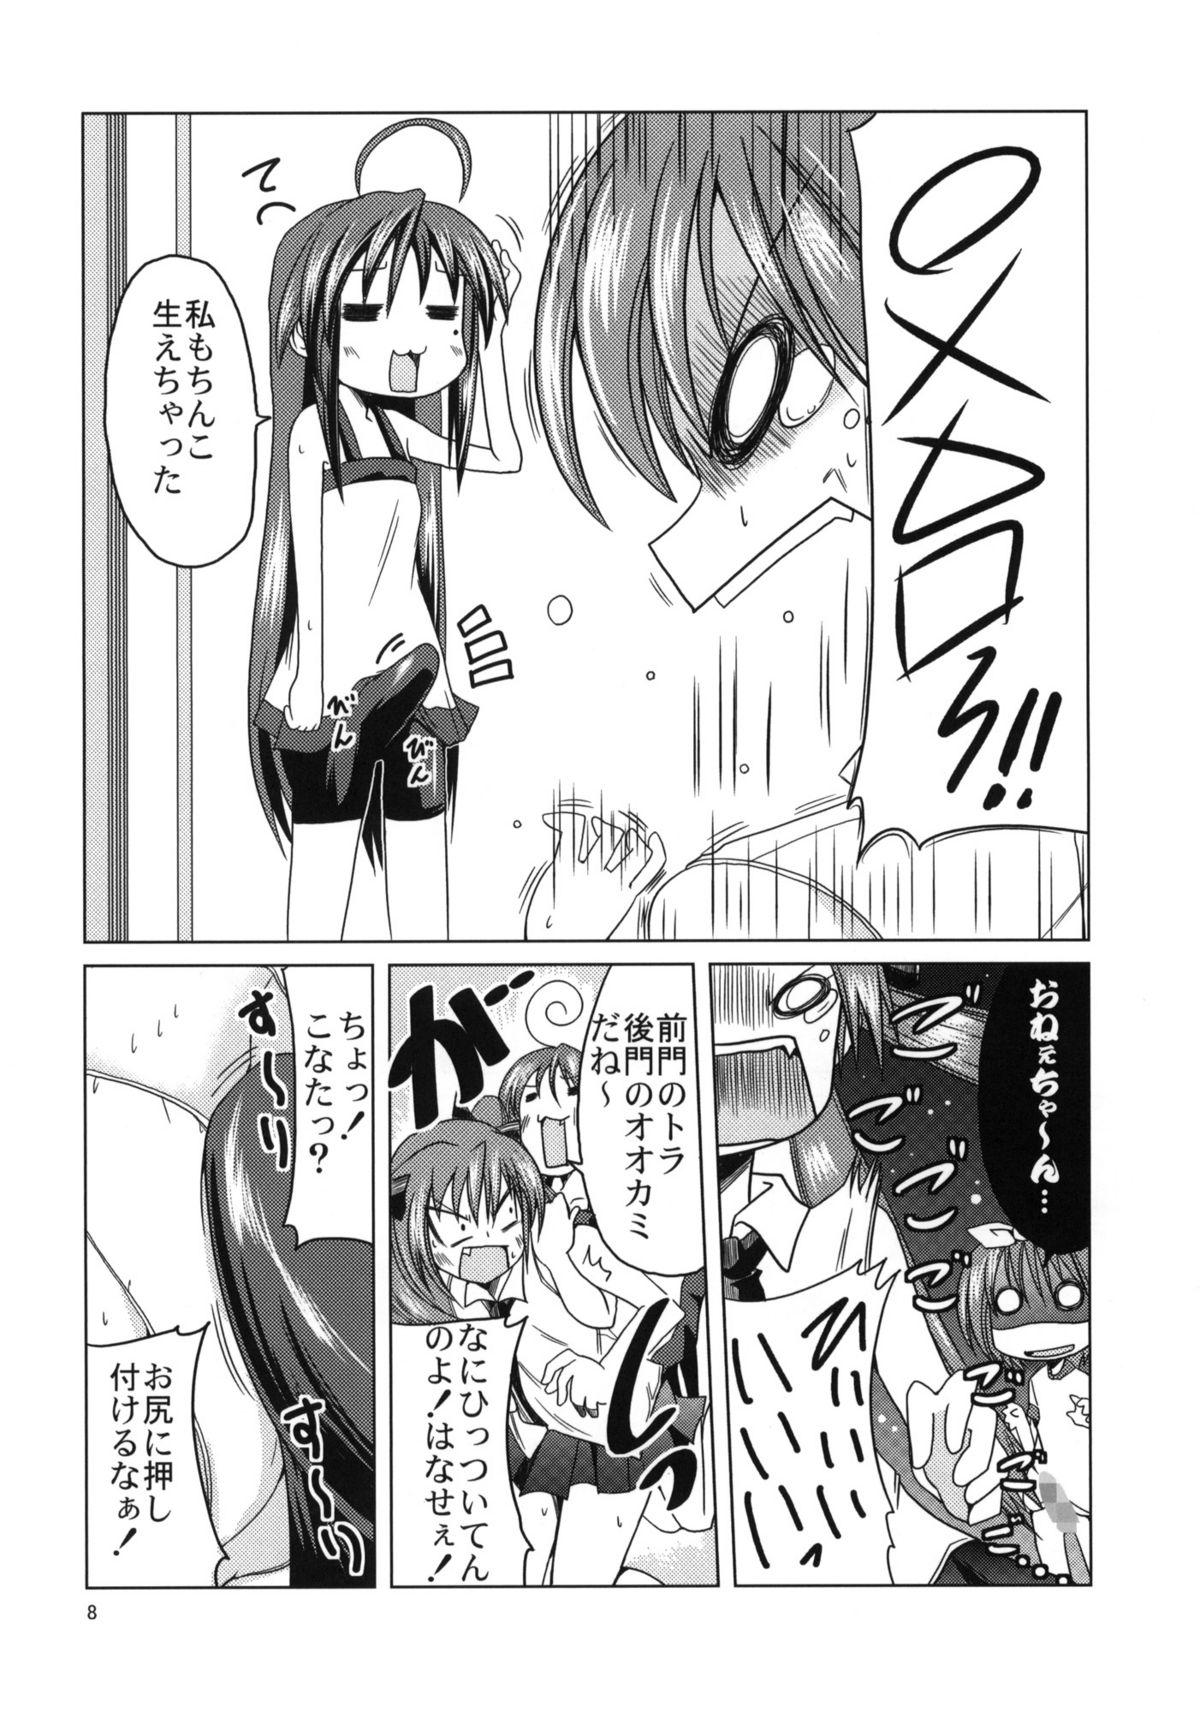 Bulge Lucky Ura Channel - Lucky star Stretch - Page 7